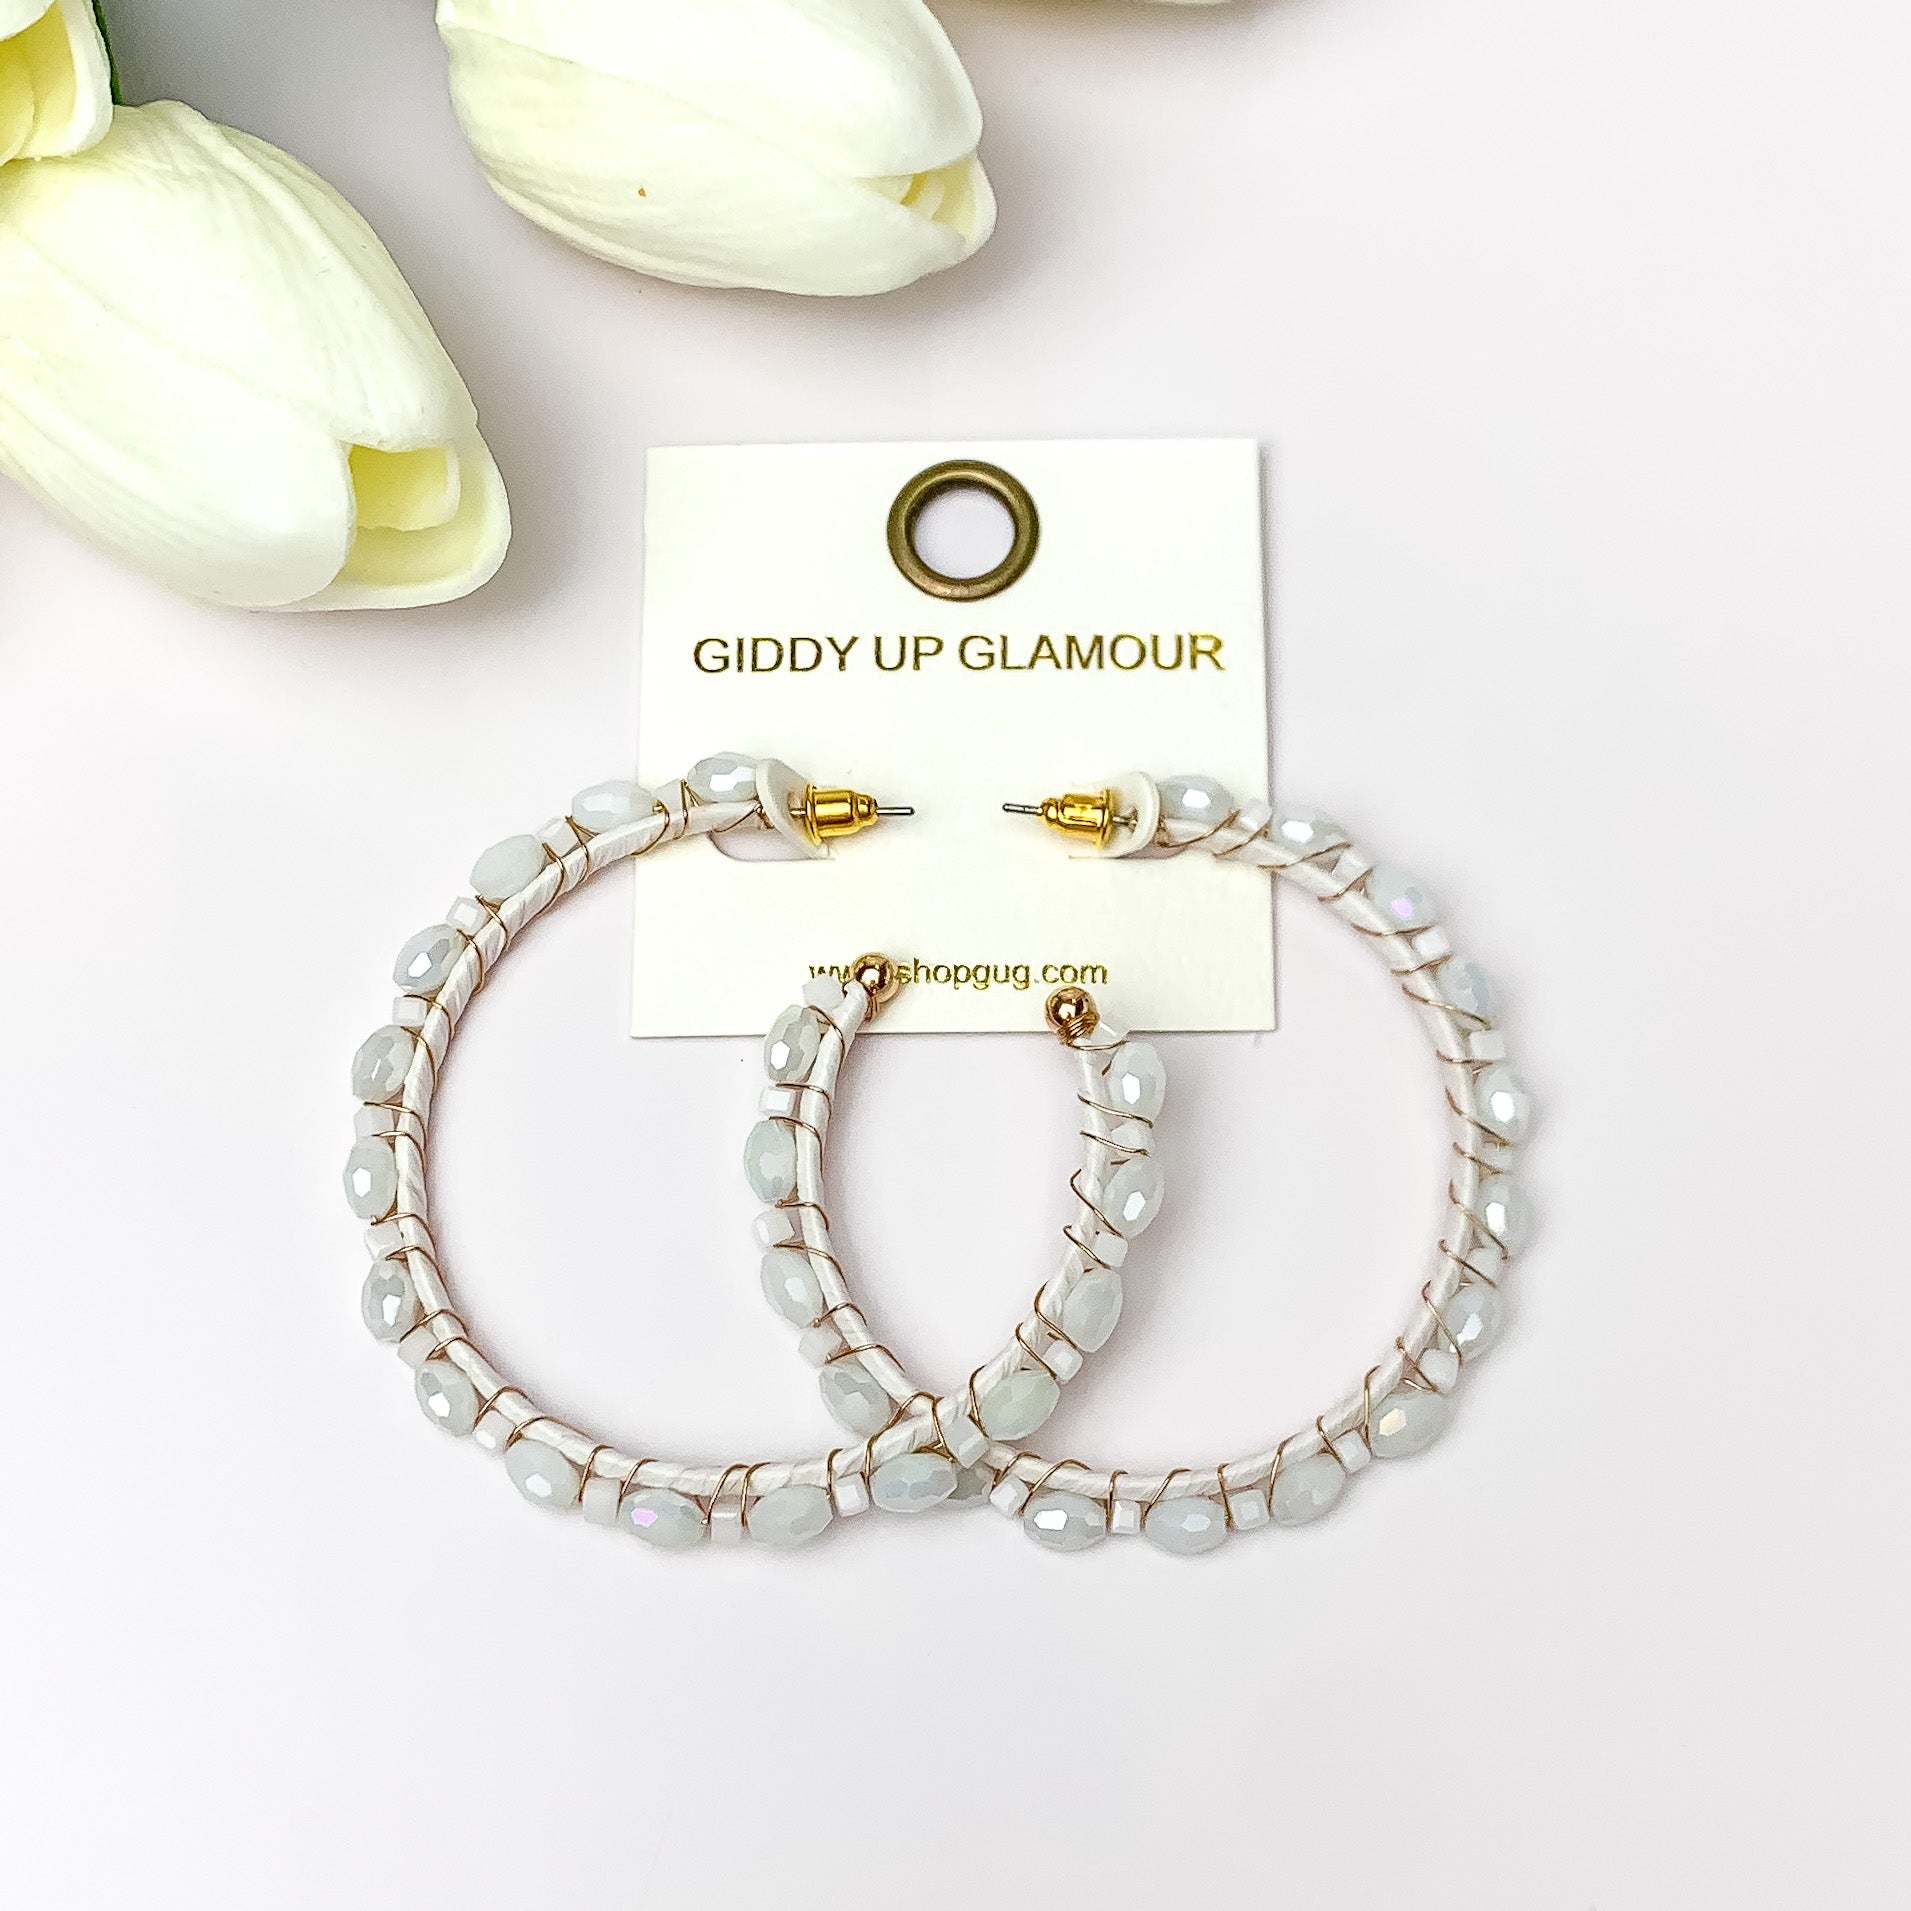 Large Hoops Outlined with Crystals in White. Pictured on a white background with white flowers in the top left corner.